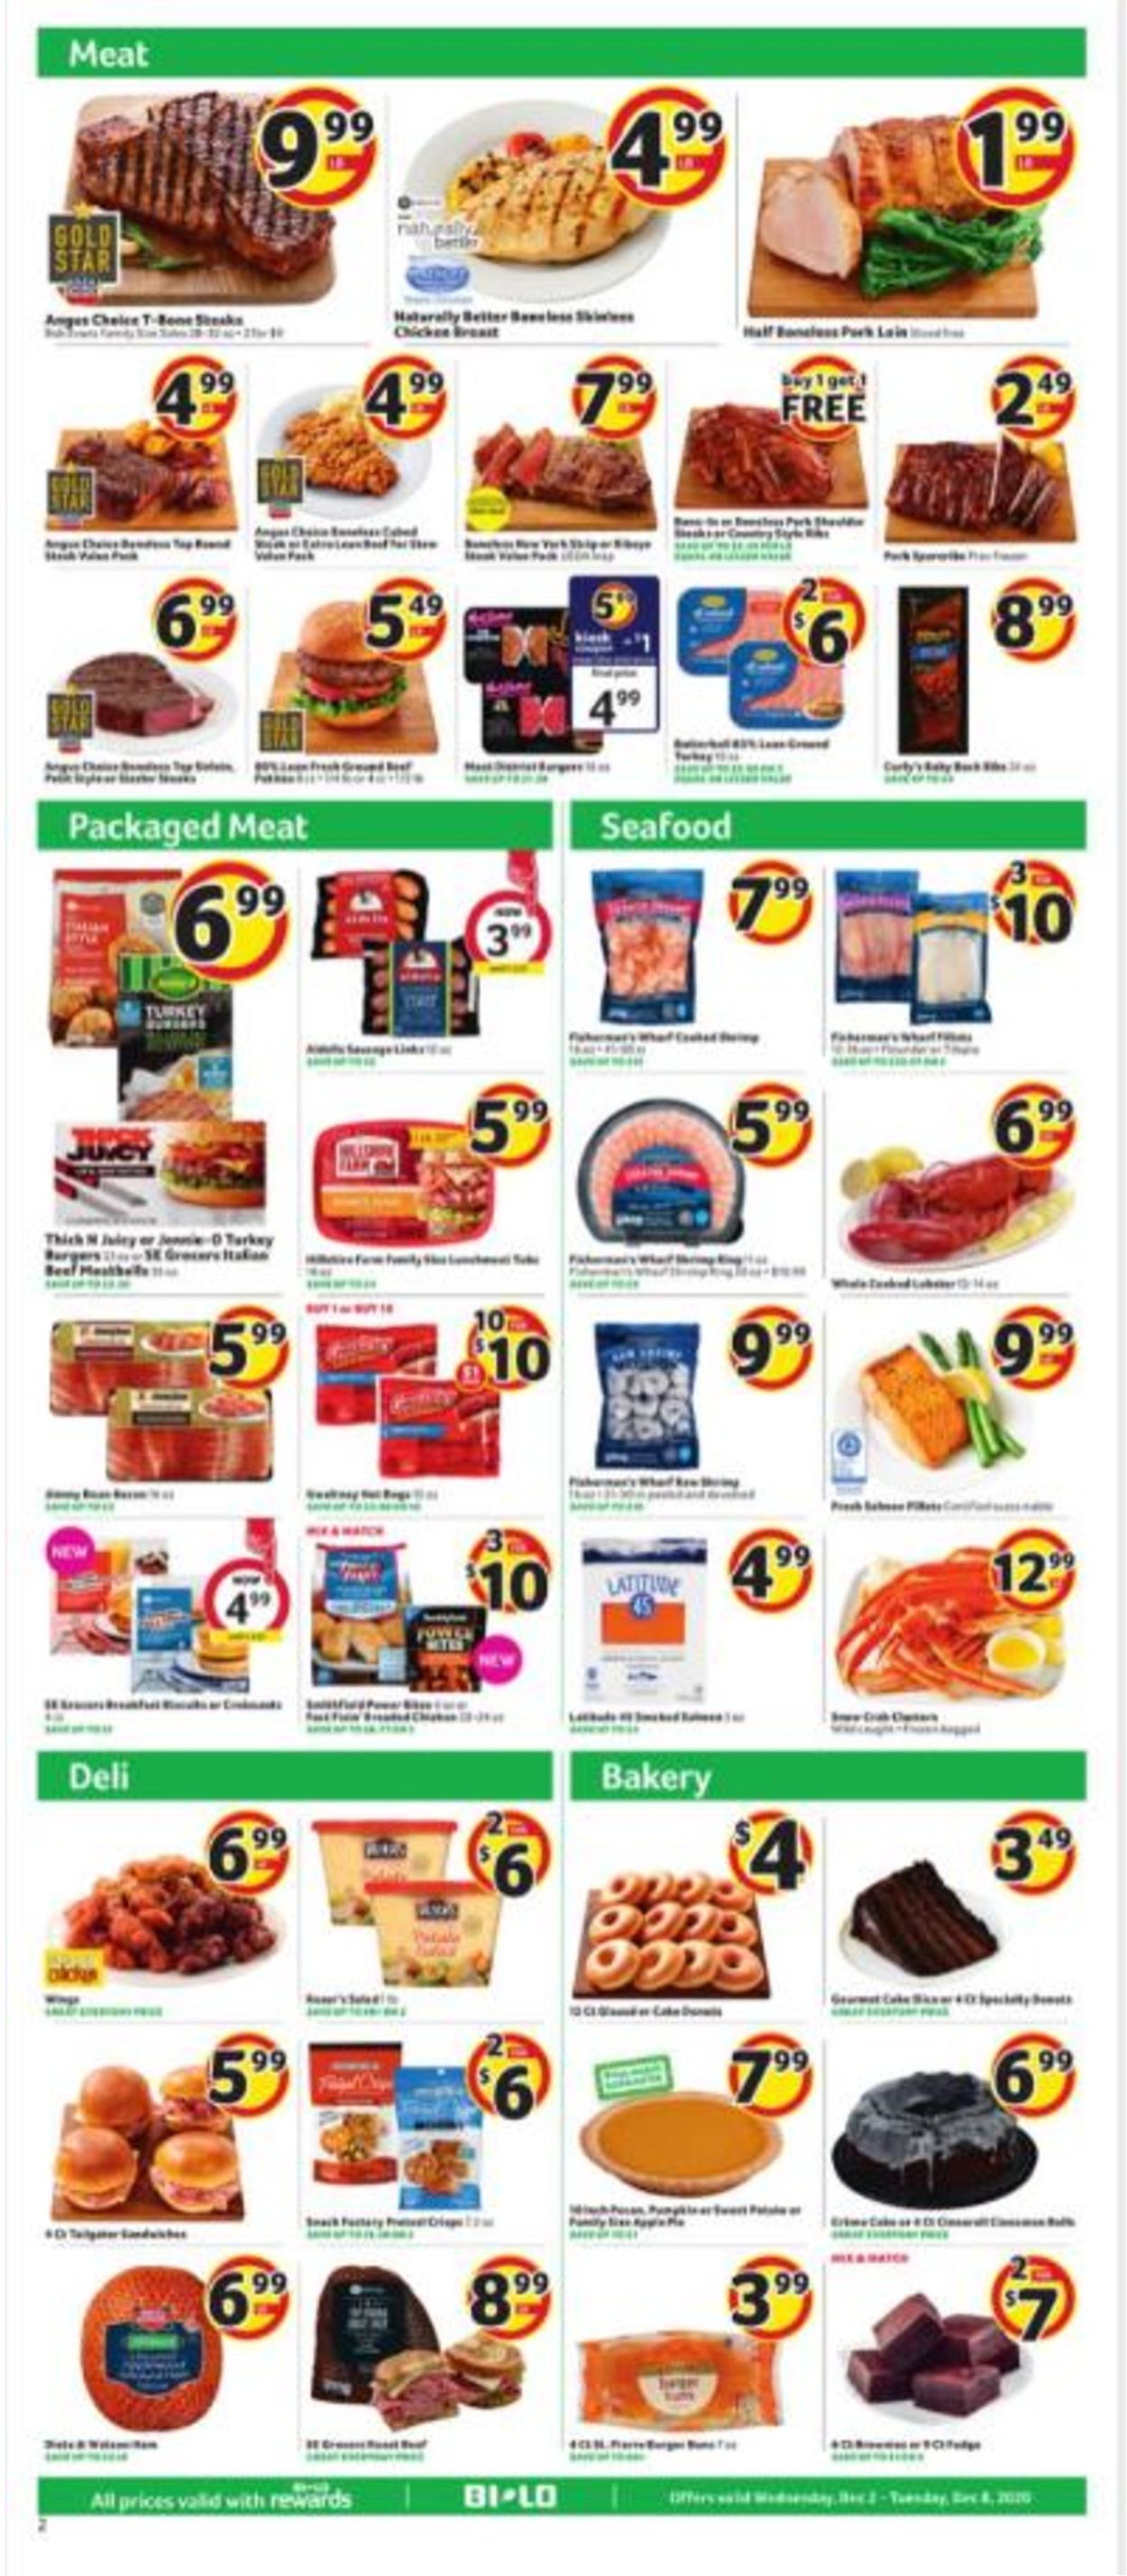 Catalogue BI-LO from 12/02/2020